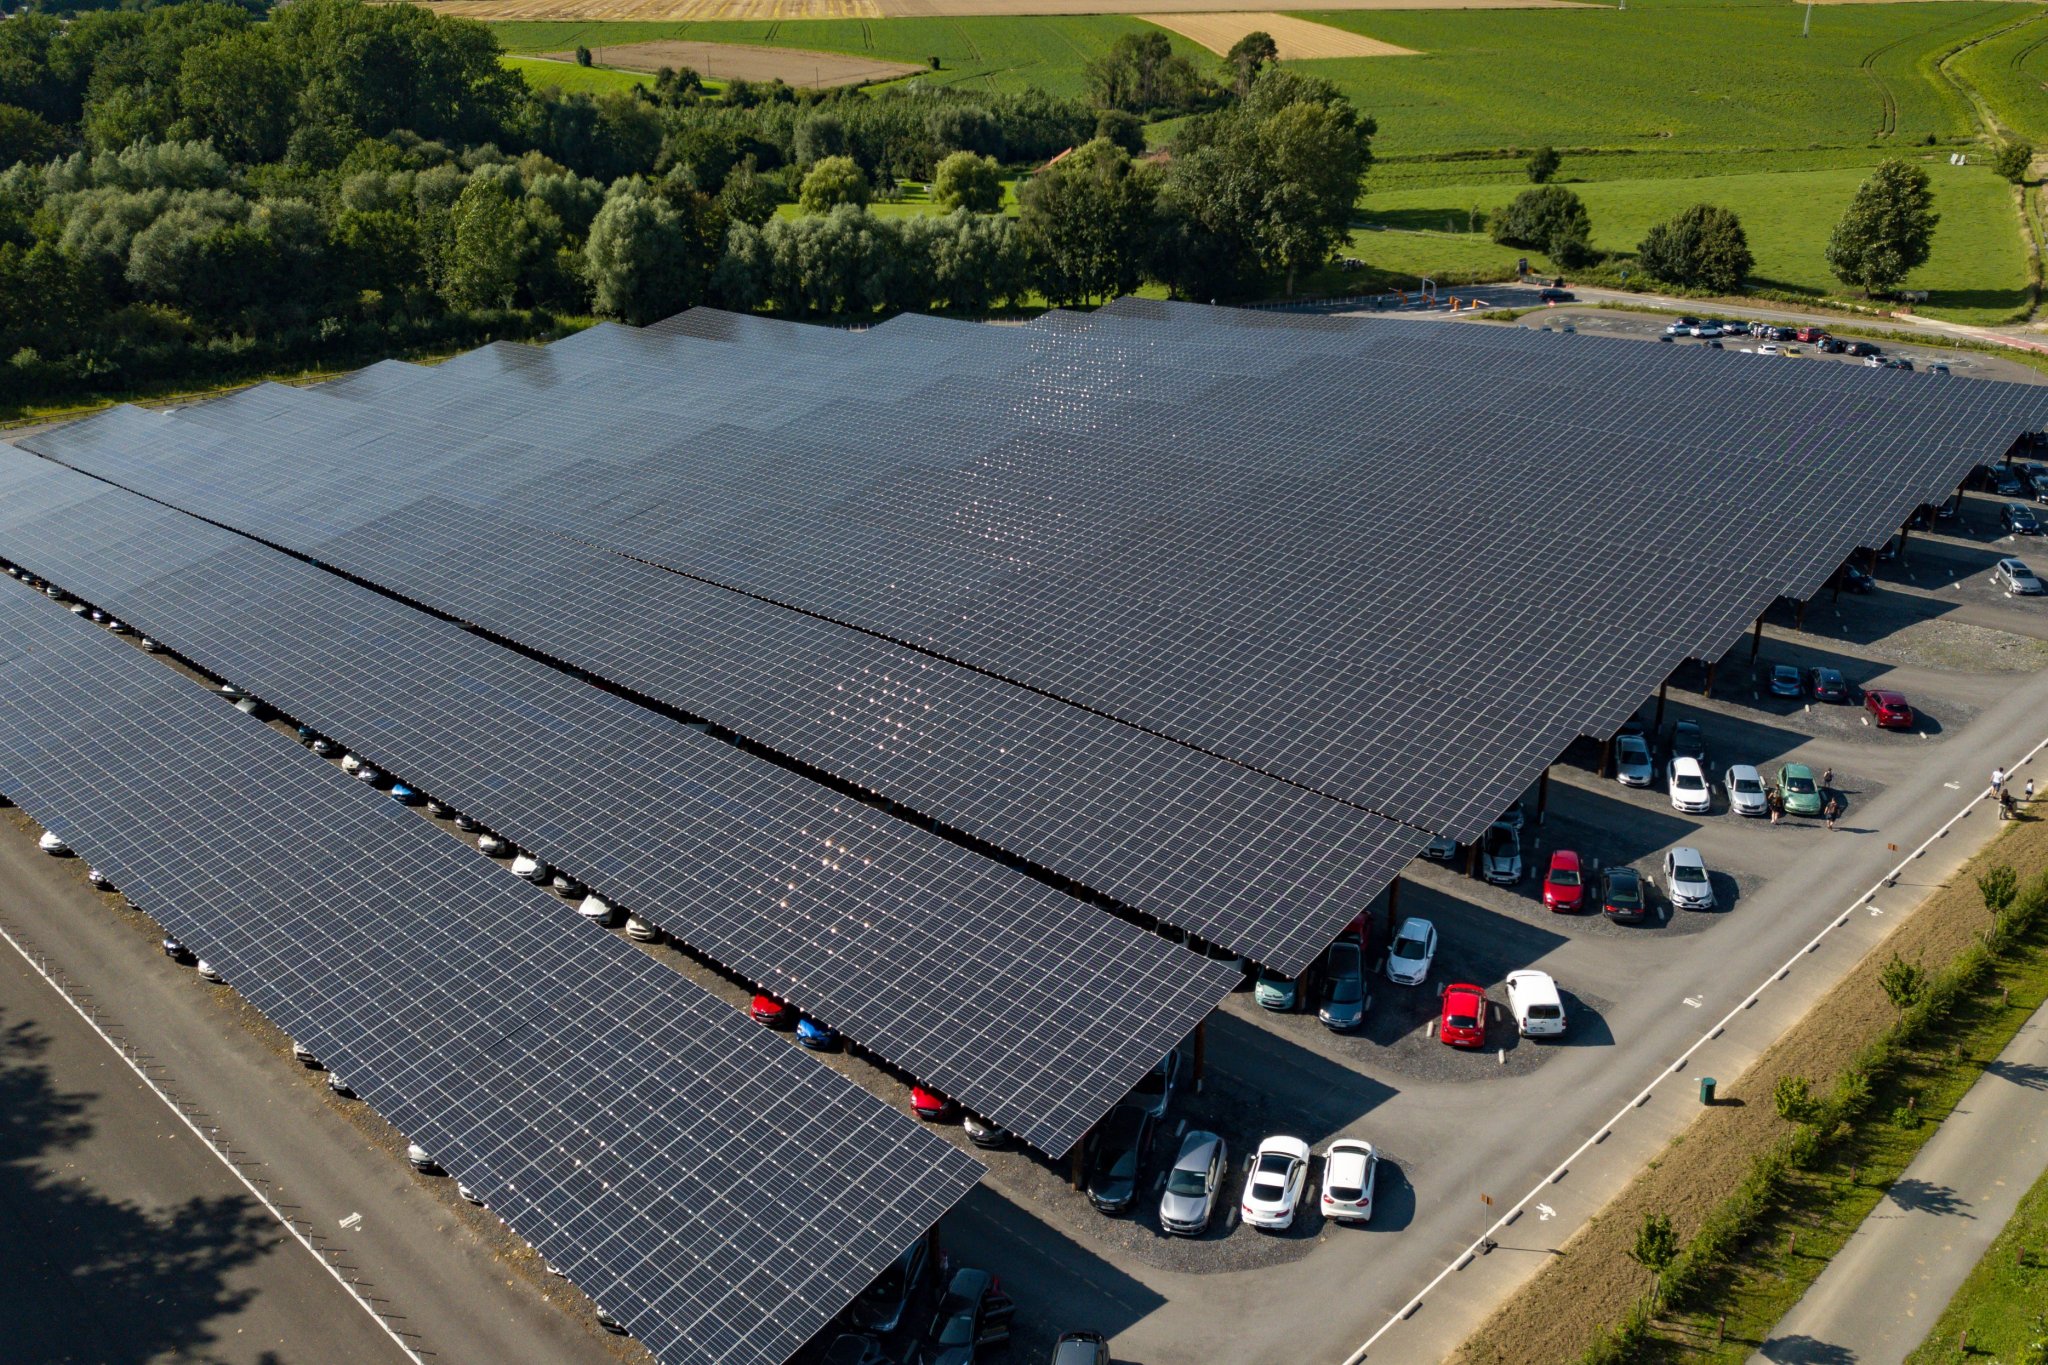 New French law will require parking lots to install solar panels